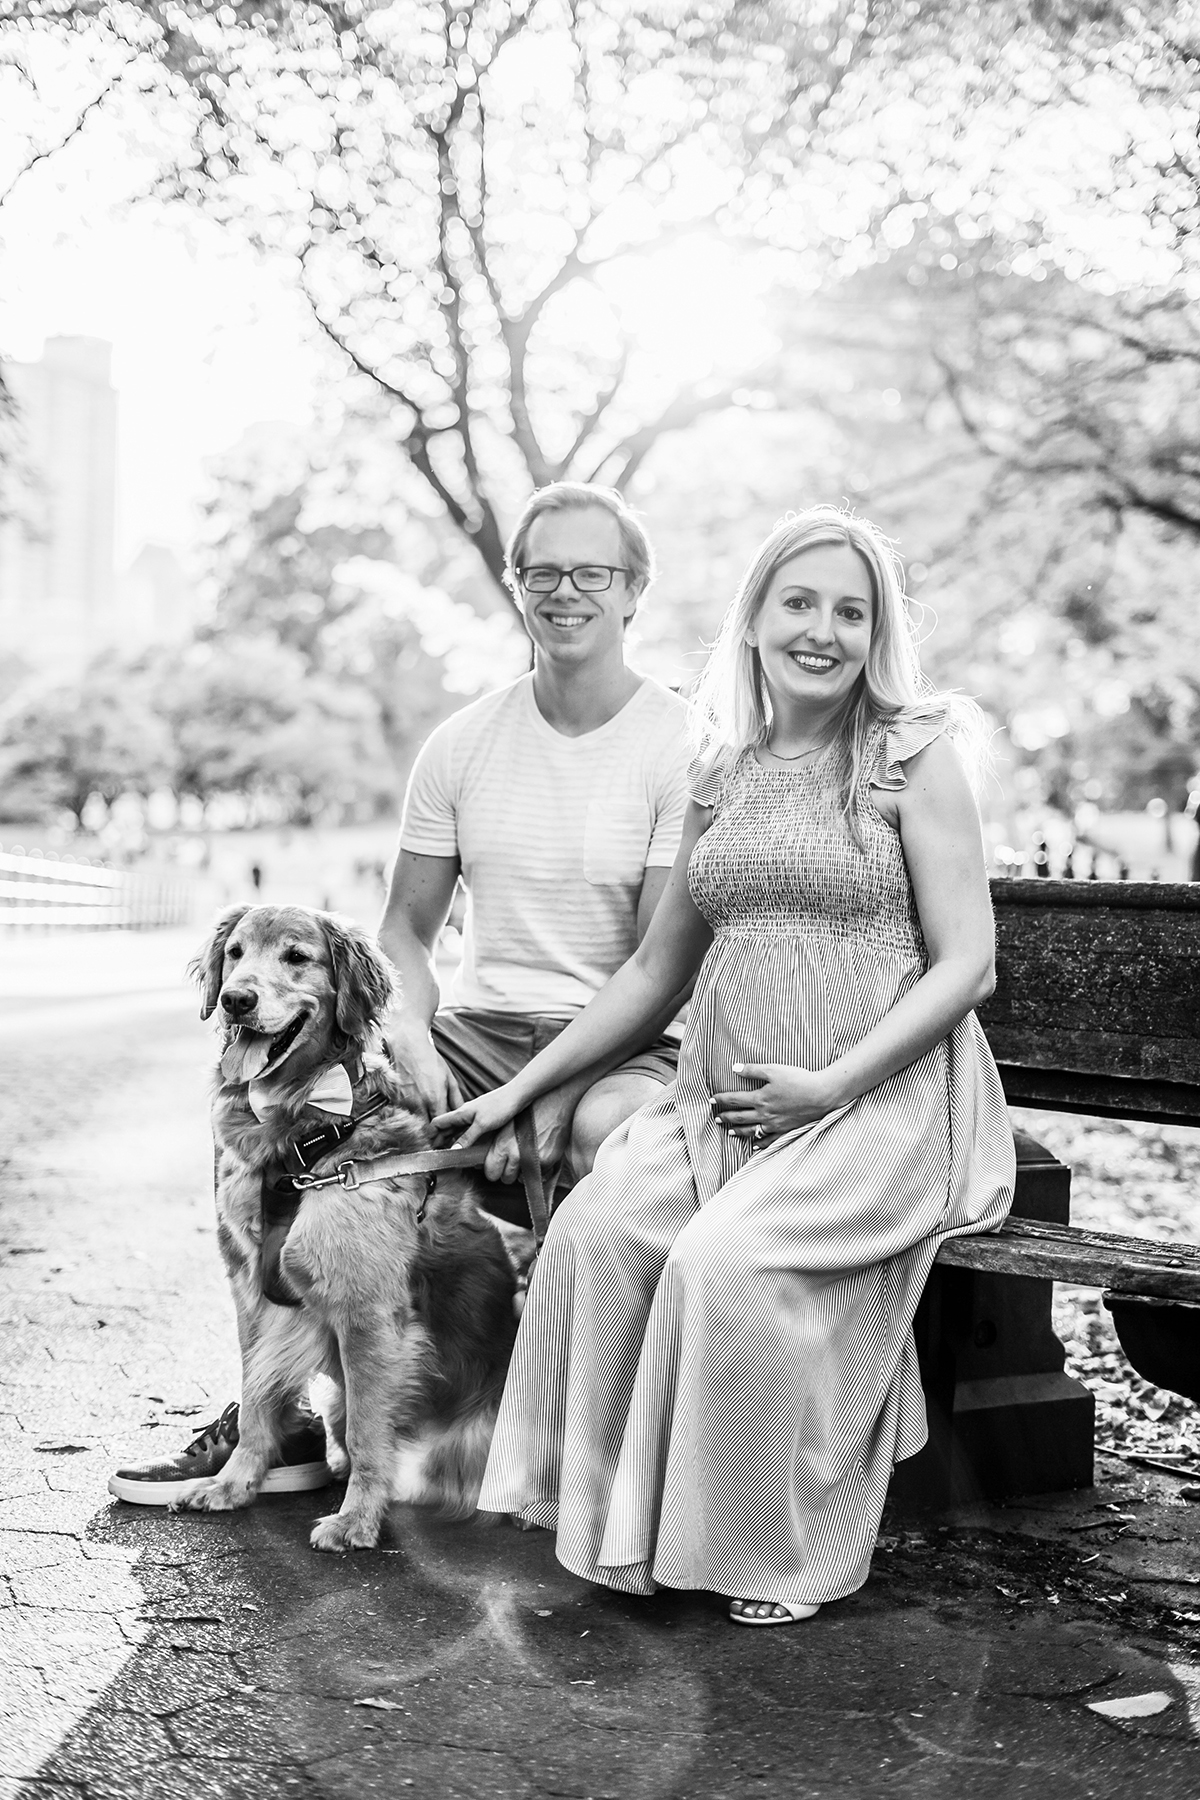 Black and white photo of parents with their dog, woman is pregnant